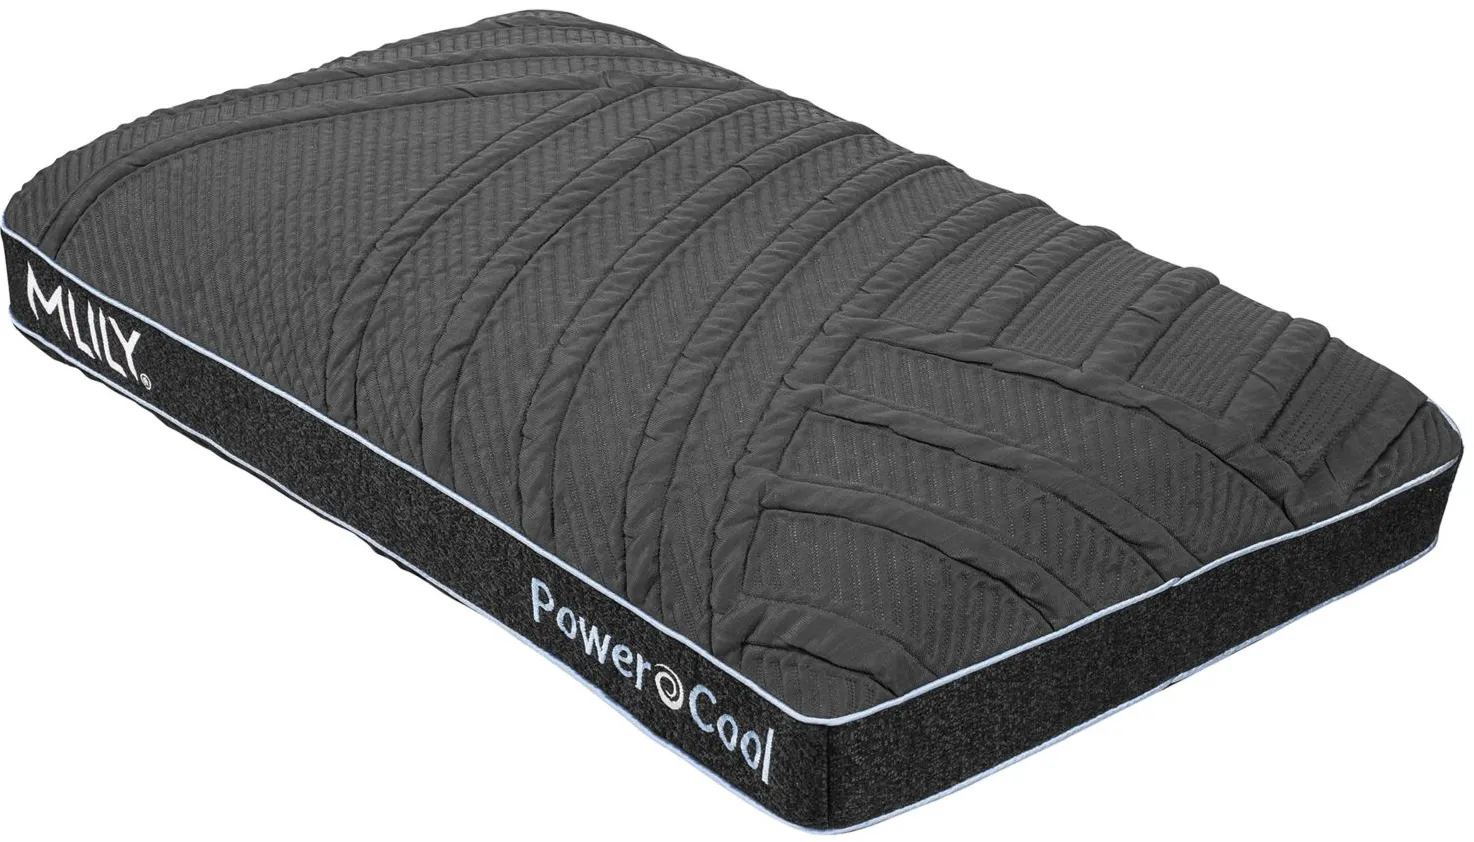 PowerCool Pillow (Single) in Black by Mlily USA,